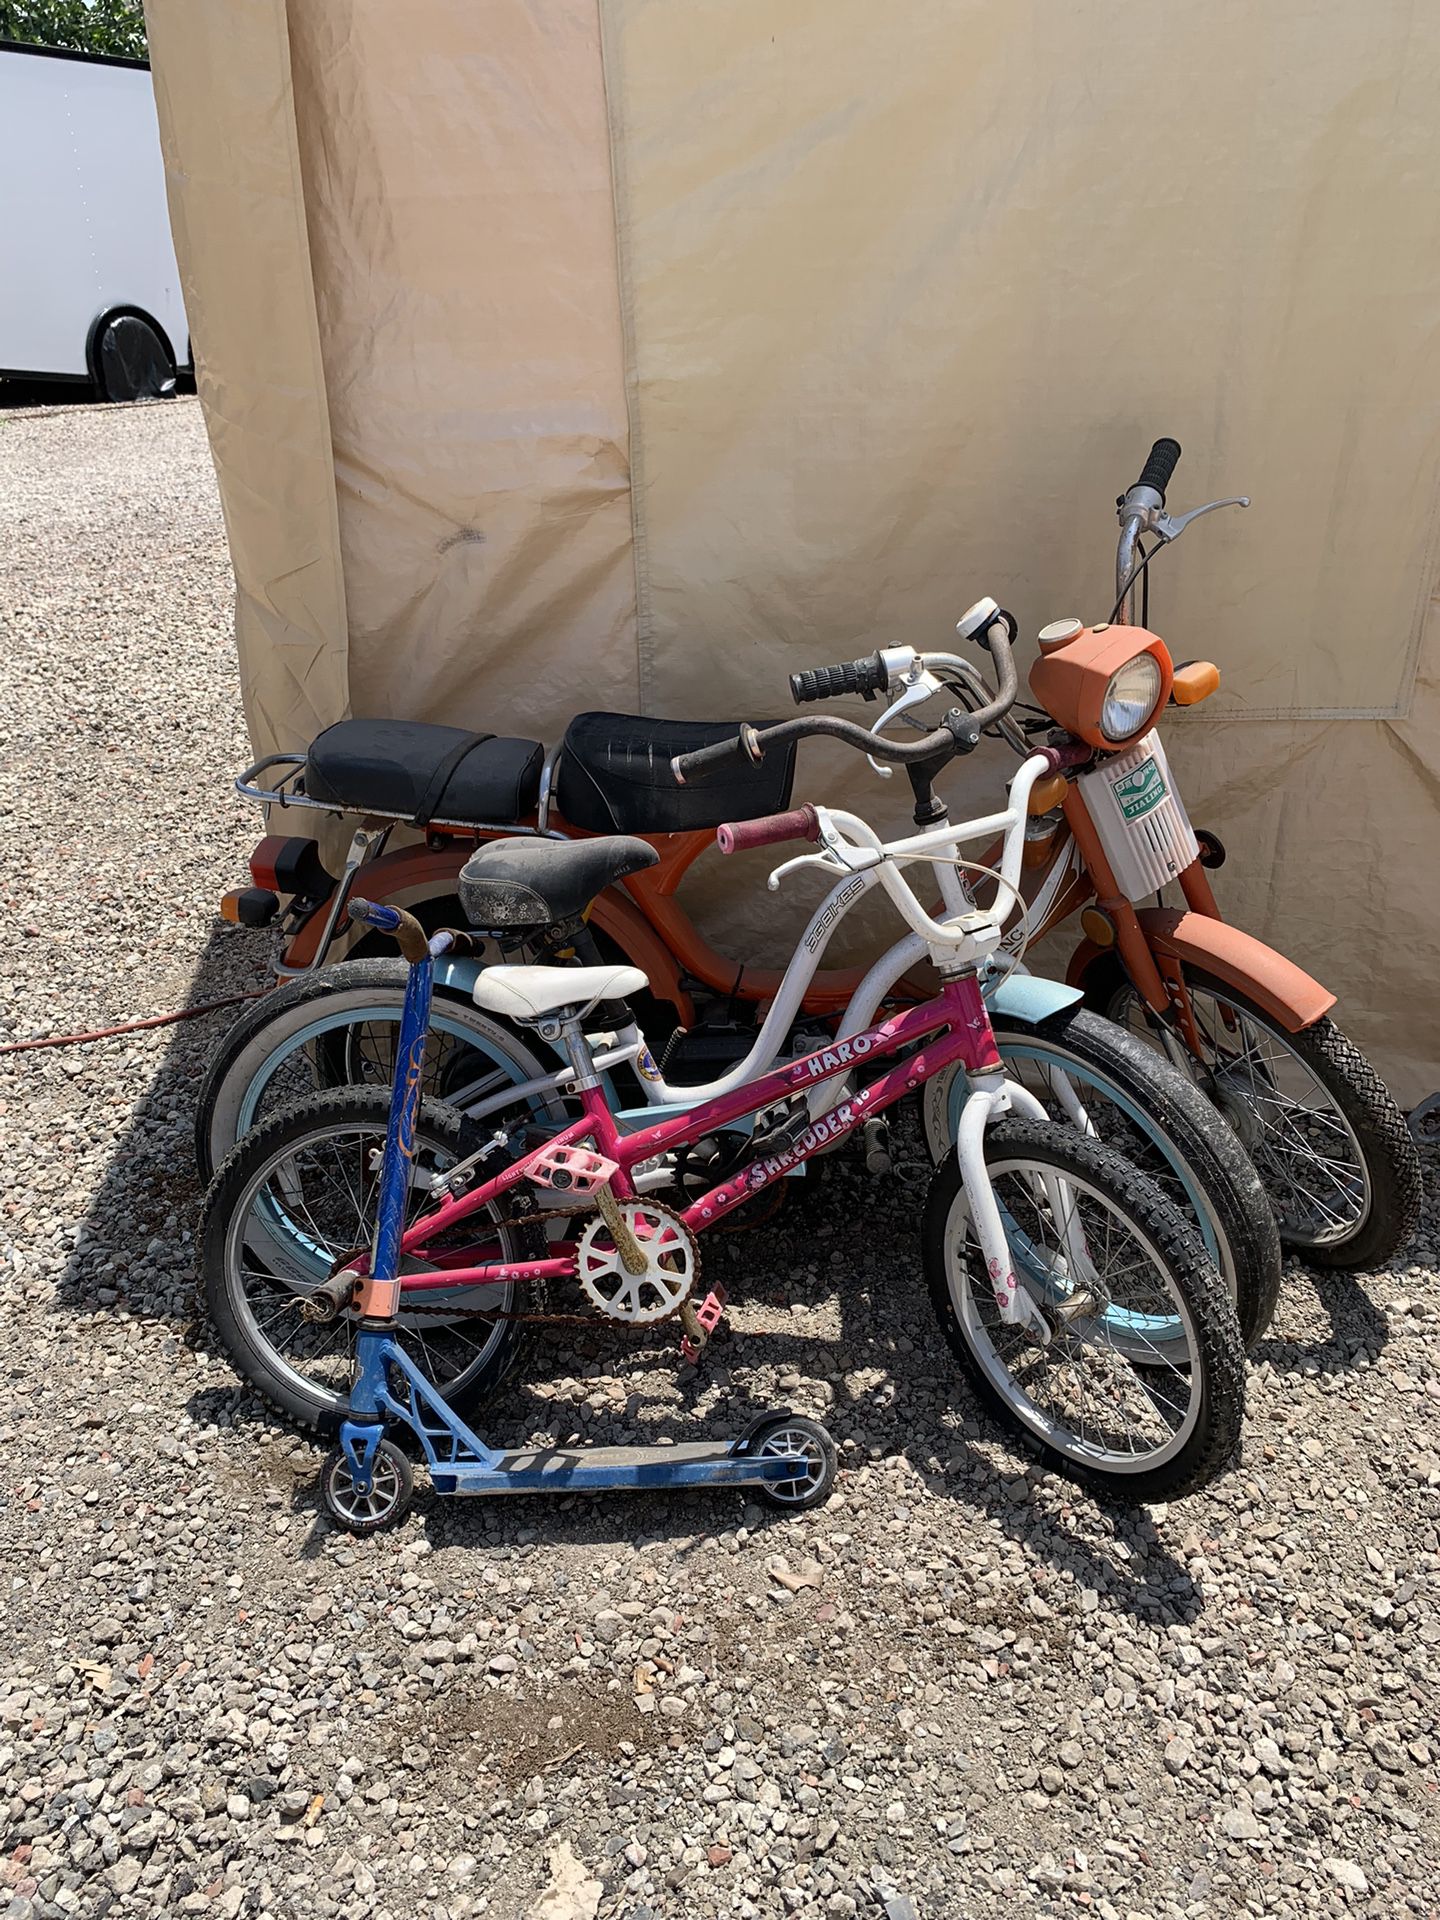 Bikes, Scooter, Gas Moped, Axles, Lawn Mower